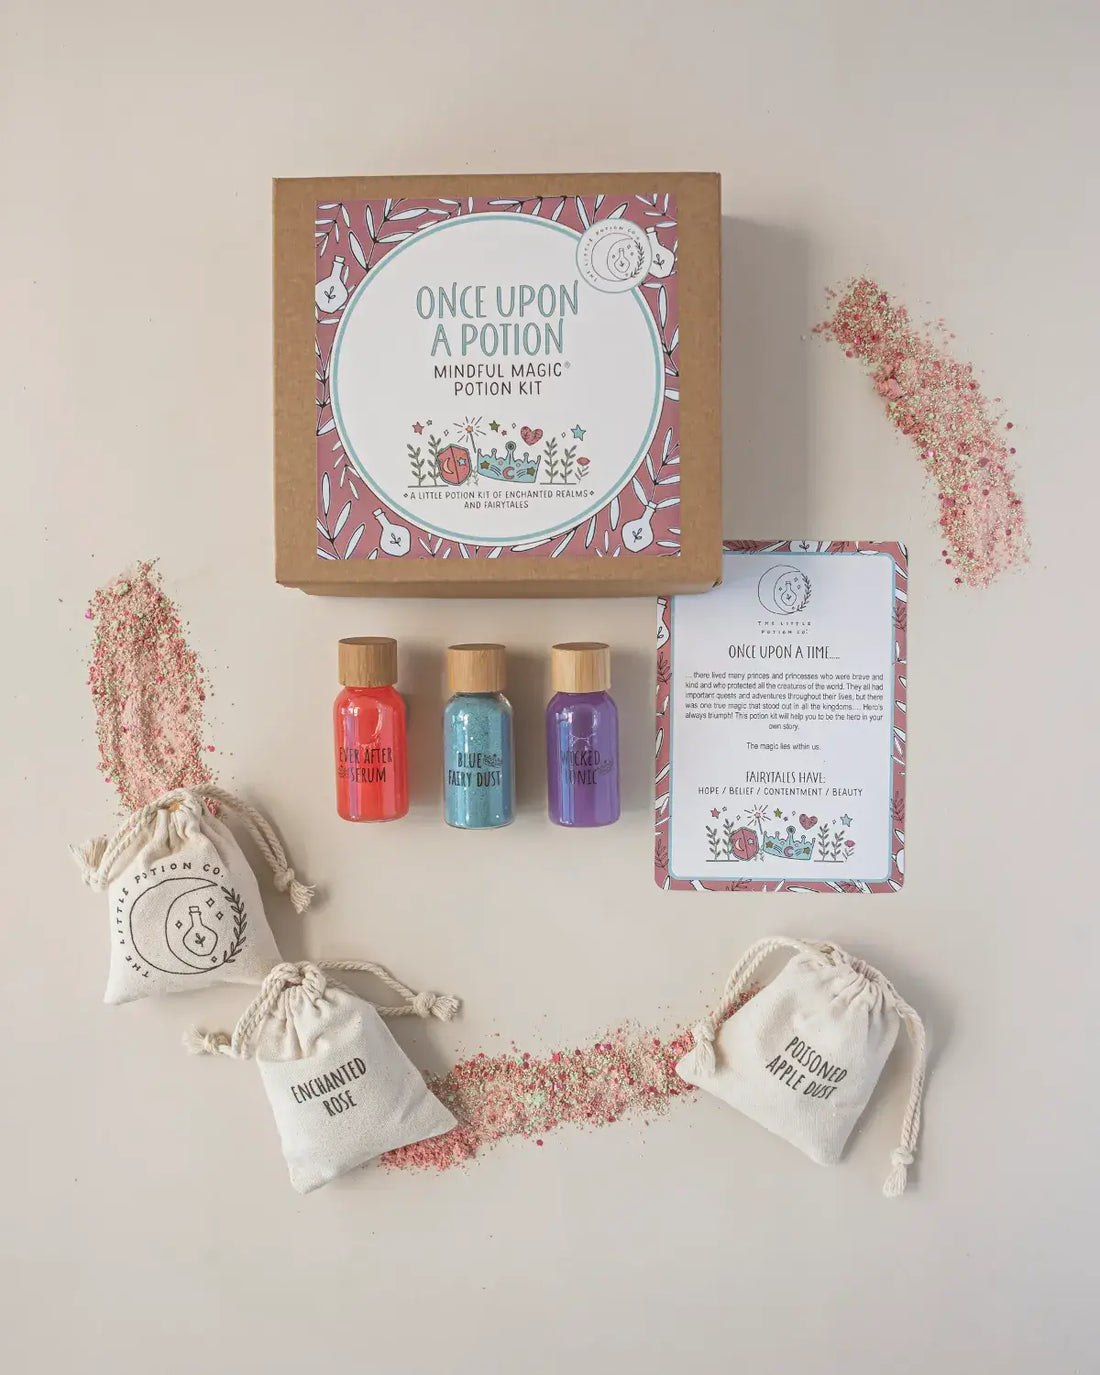 Once Upon a Potion - Mindful Potion Kit by The Little Potion Co 